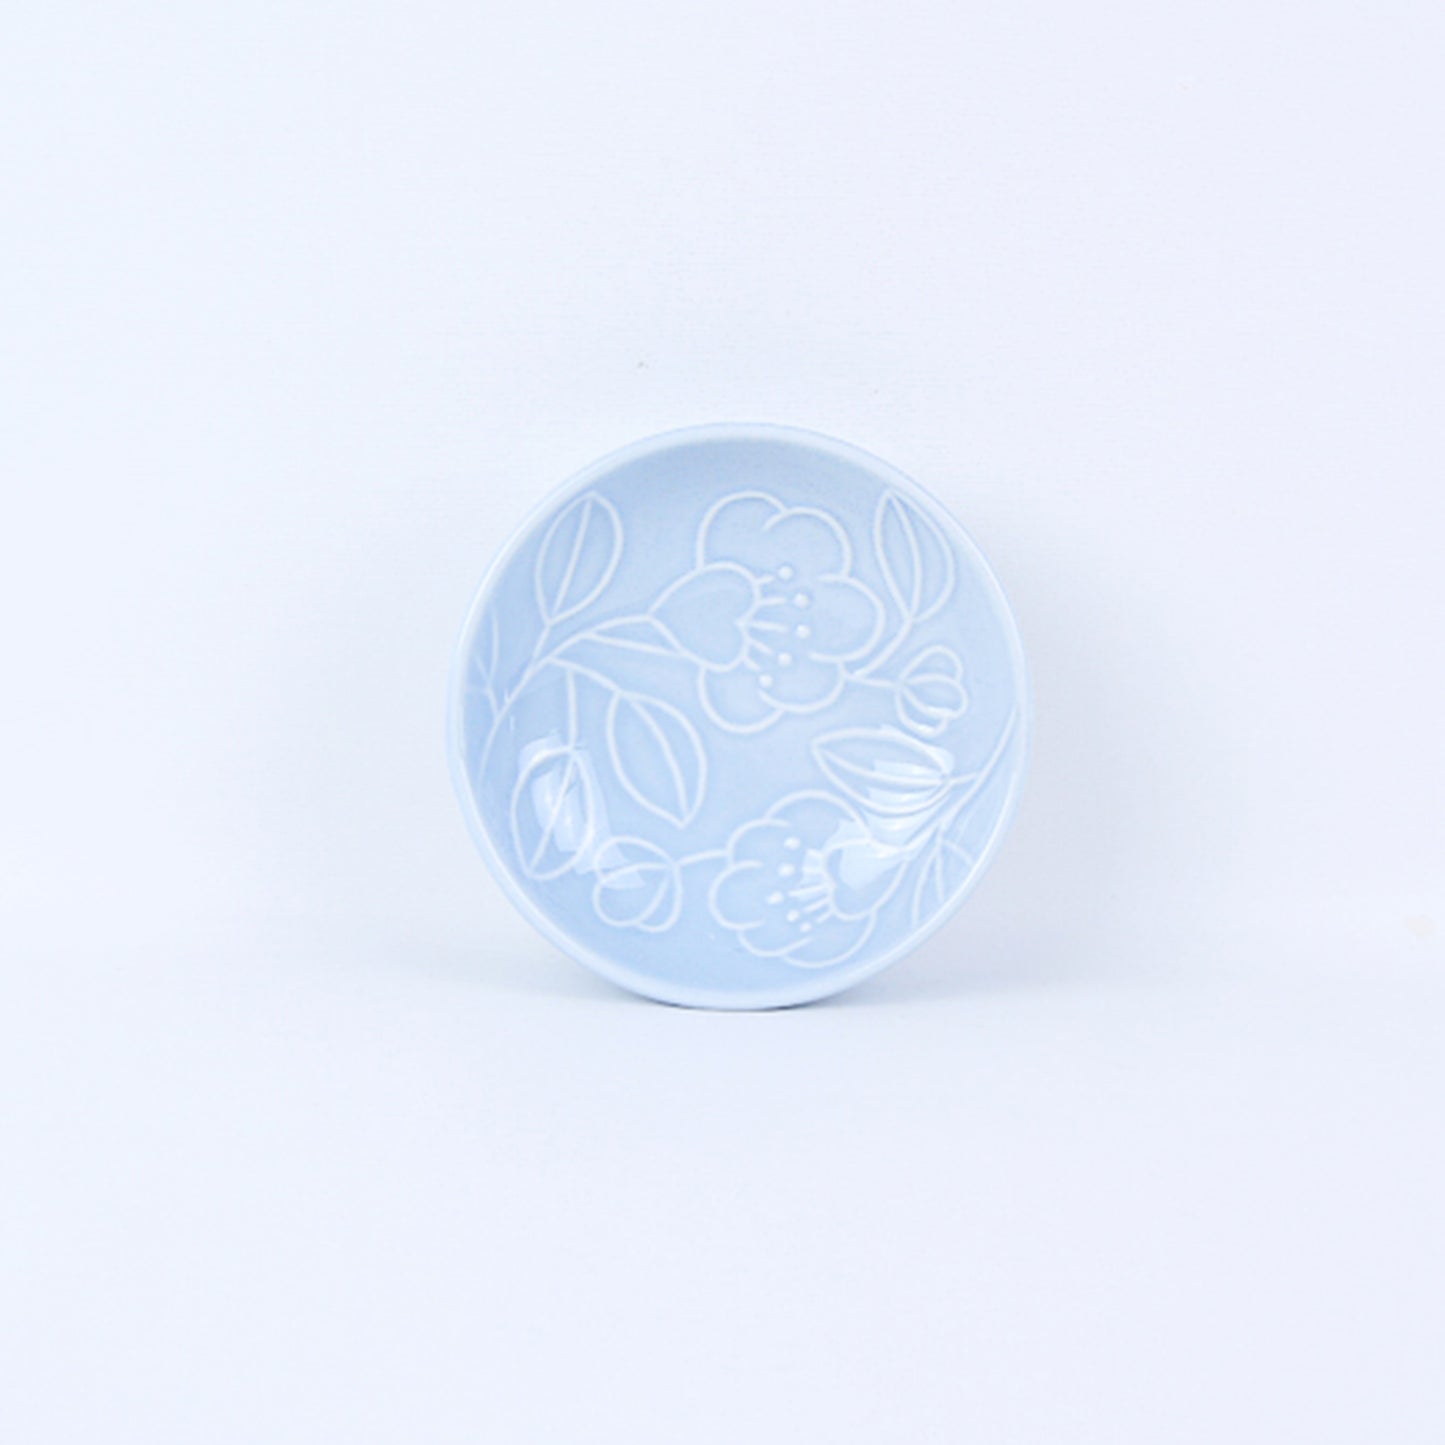 Refreshing Height Round Dish 116mm (Sky Blue Colors) 𝟐𝟎% 𝐎𝐅𝐅